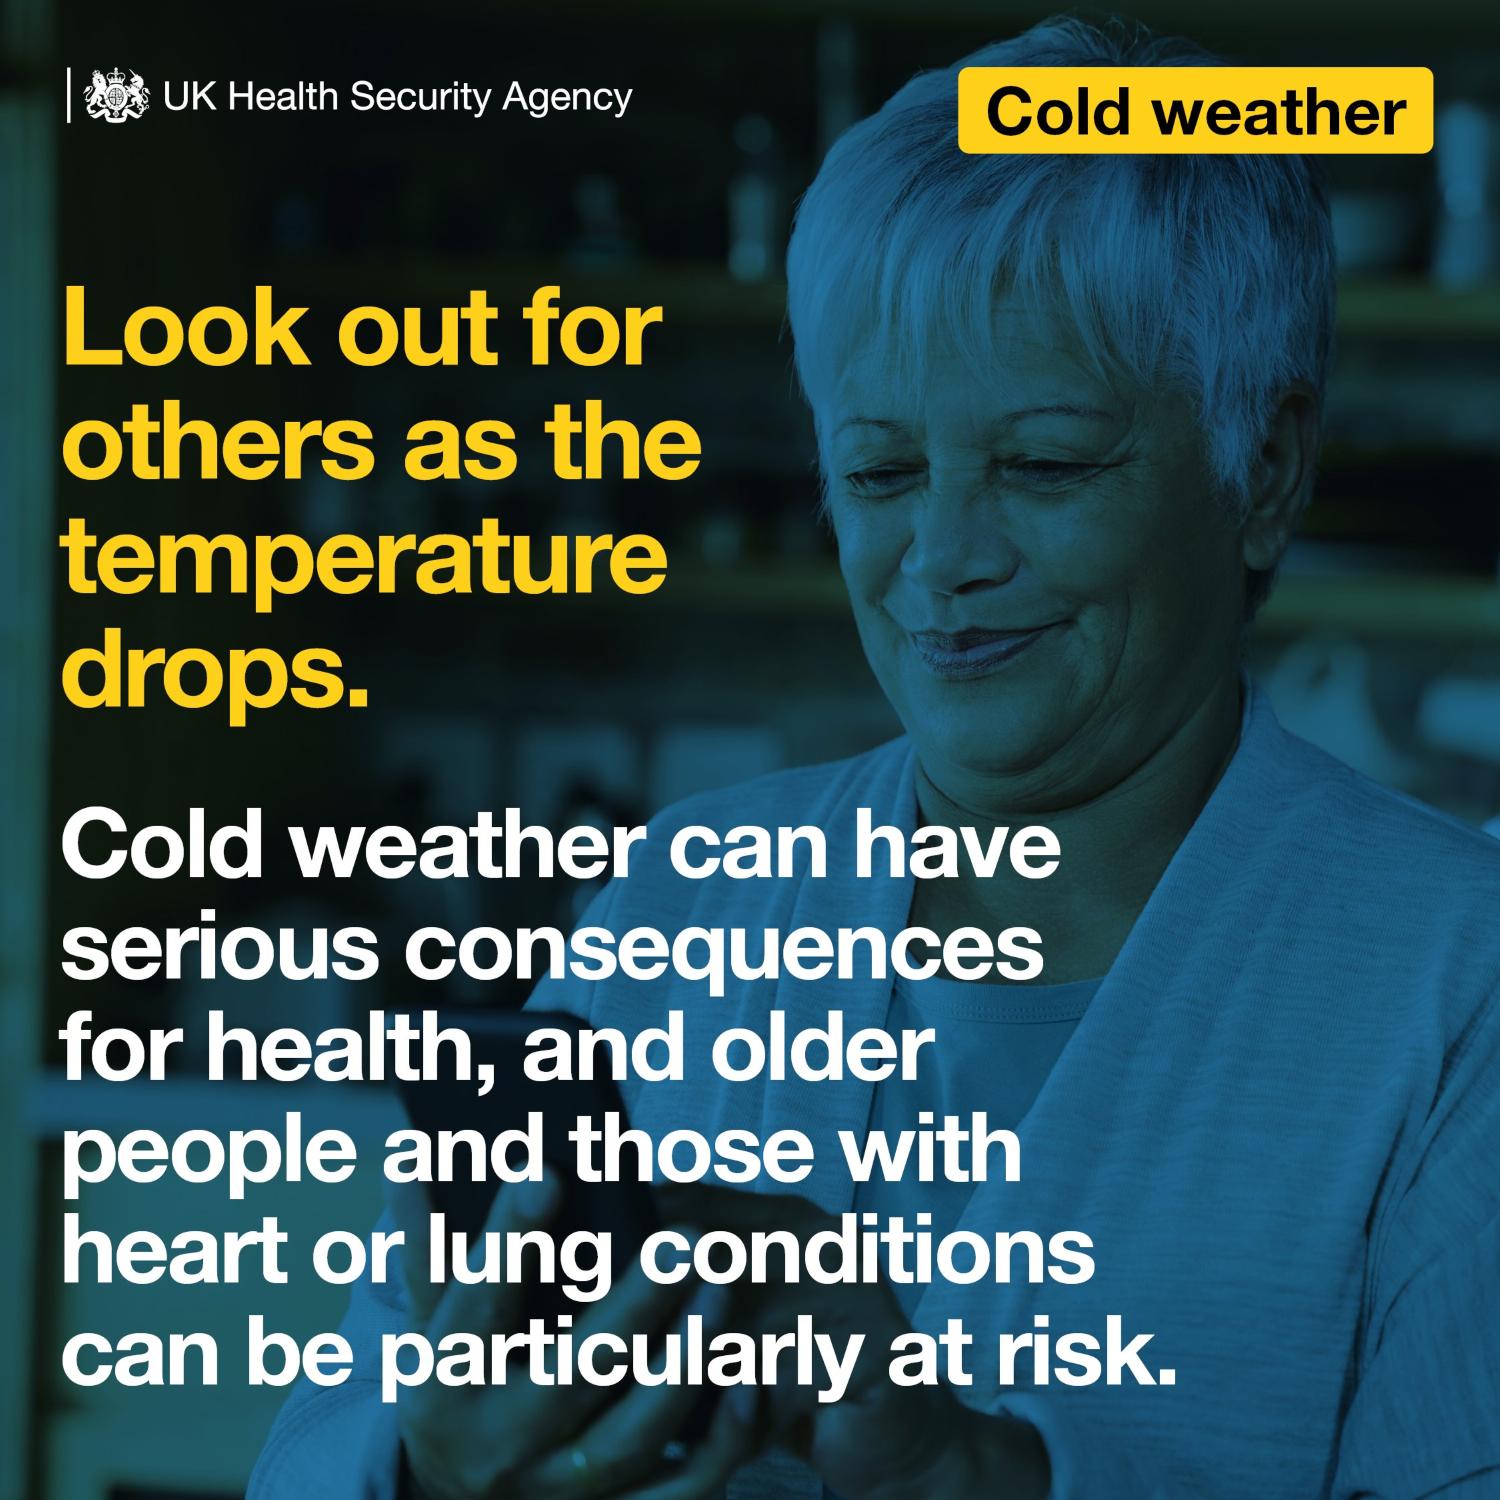 NHS urges people to stay safe and well as cold weather continues News